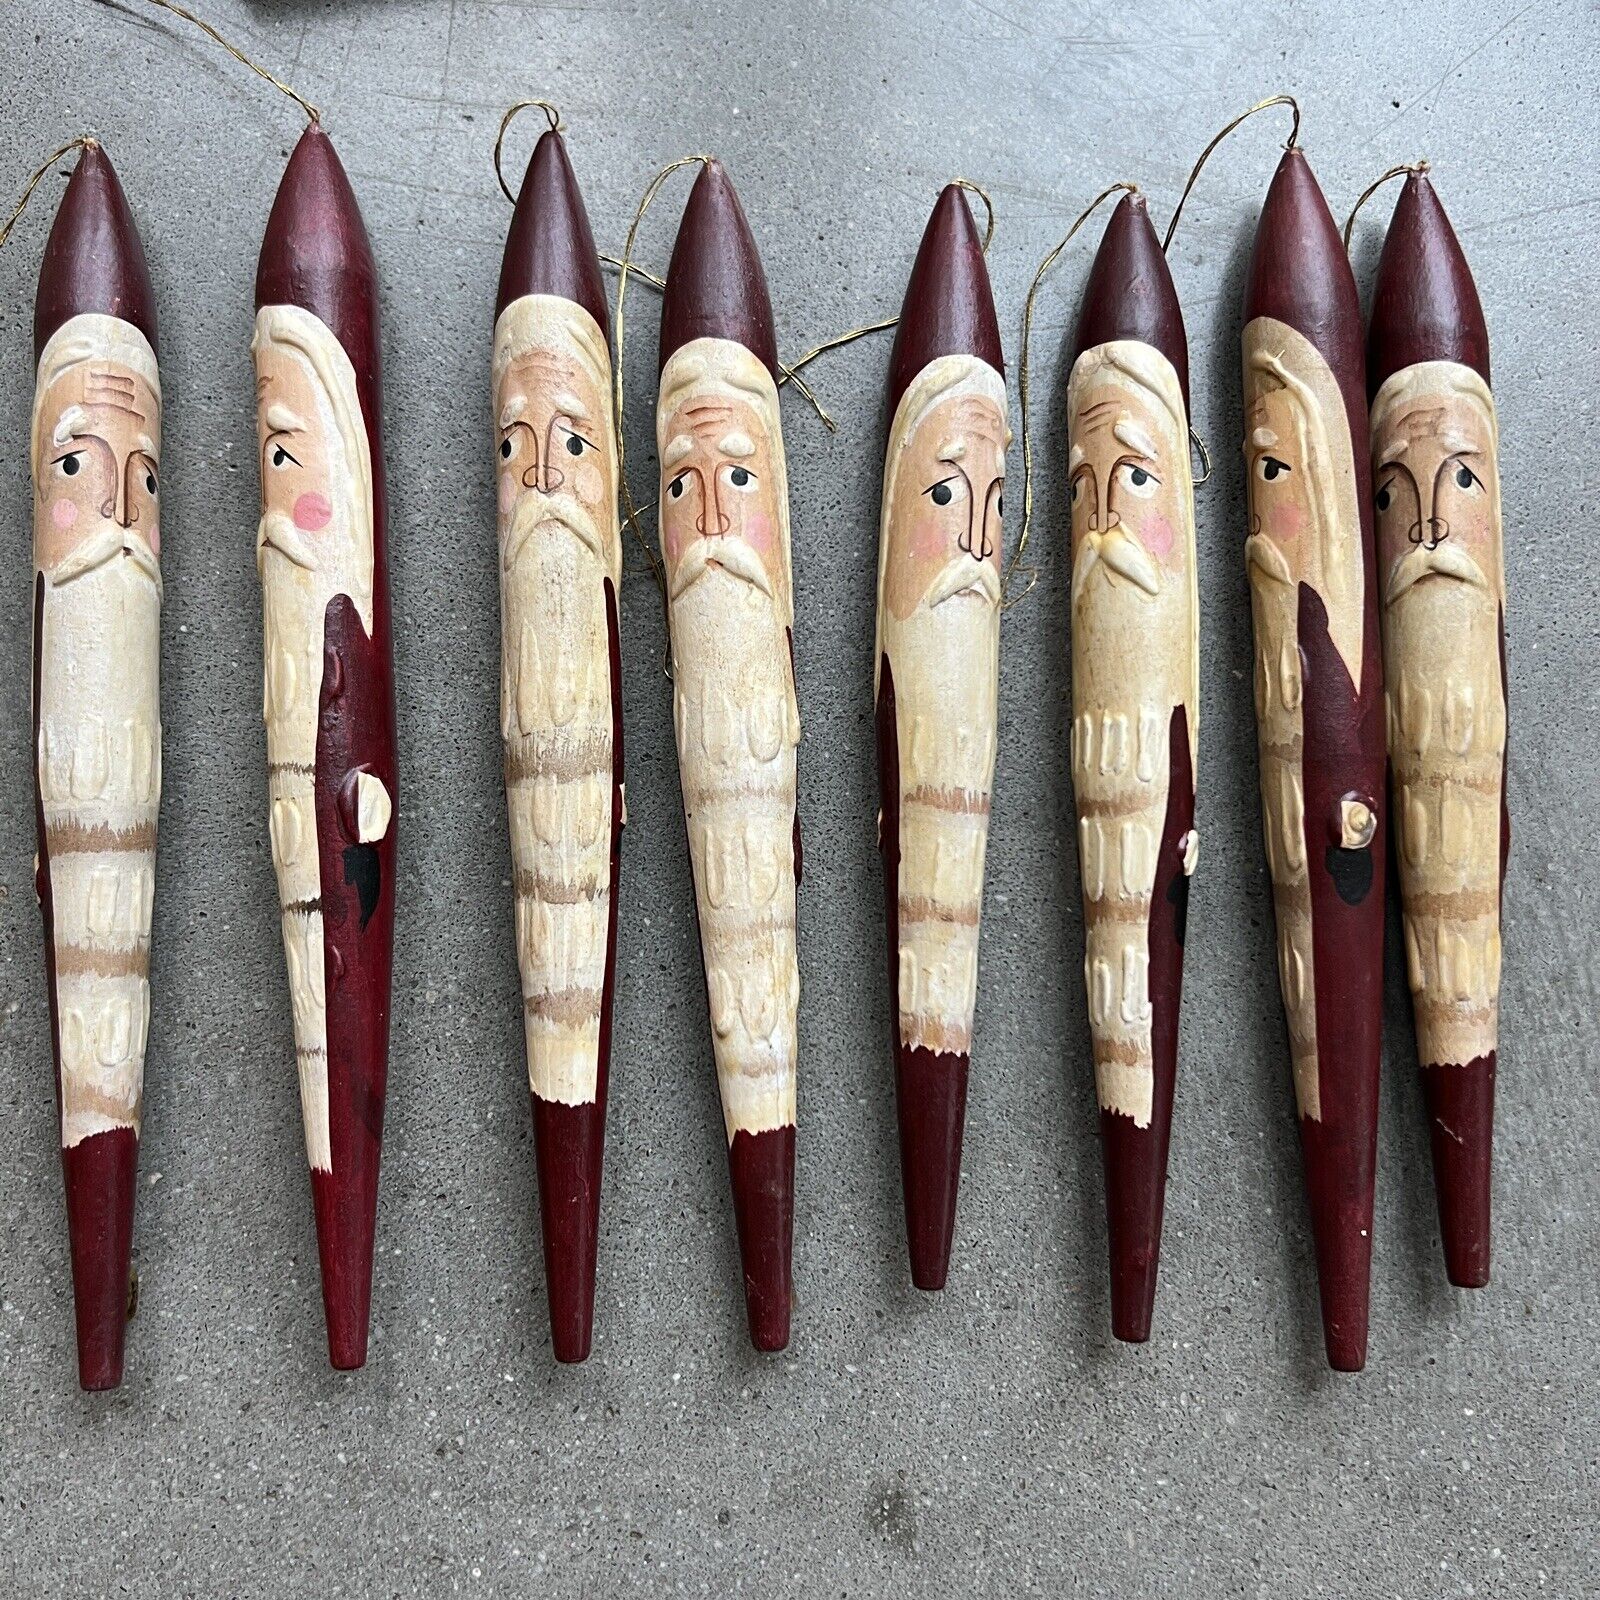 NIB new 8 Vintage Hand Painted Wooden Santa Icicle Stick Christmas Ornaments